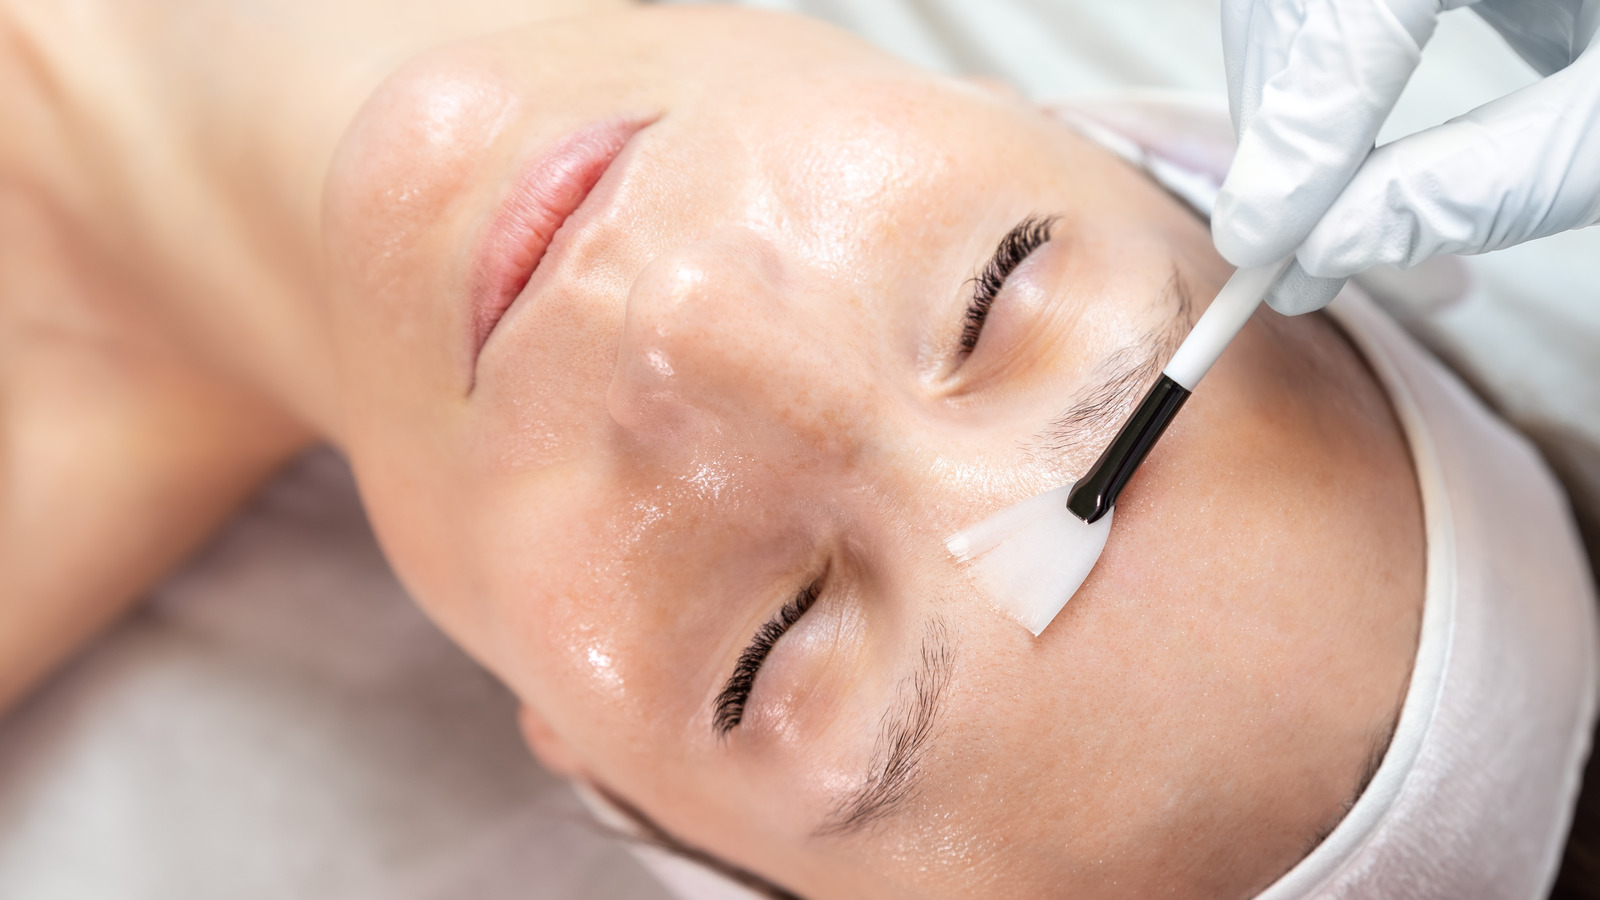 Enzyme Peels Are The Facial Going Viral For Serving Radiant Skin Without The Stinging